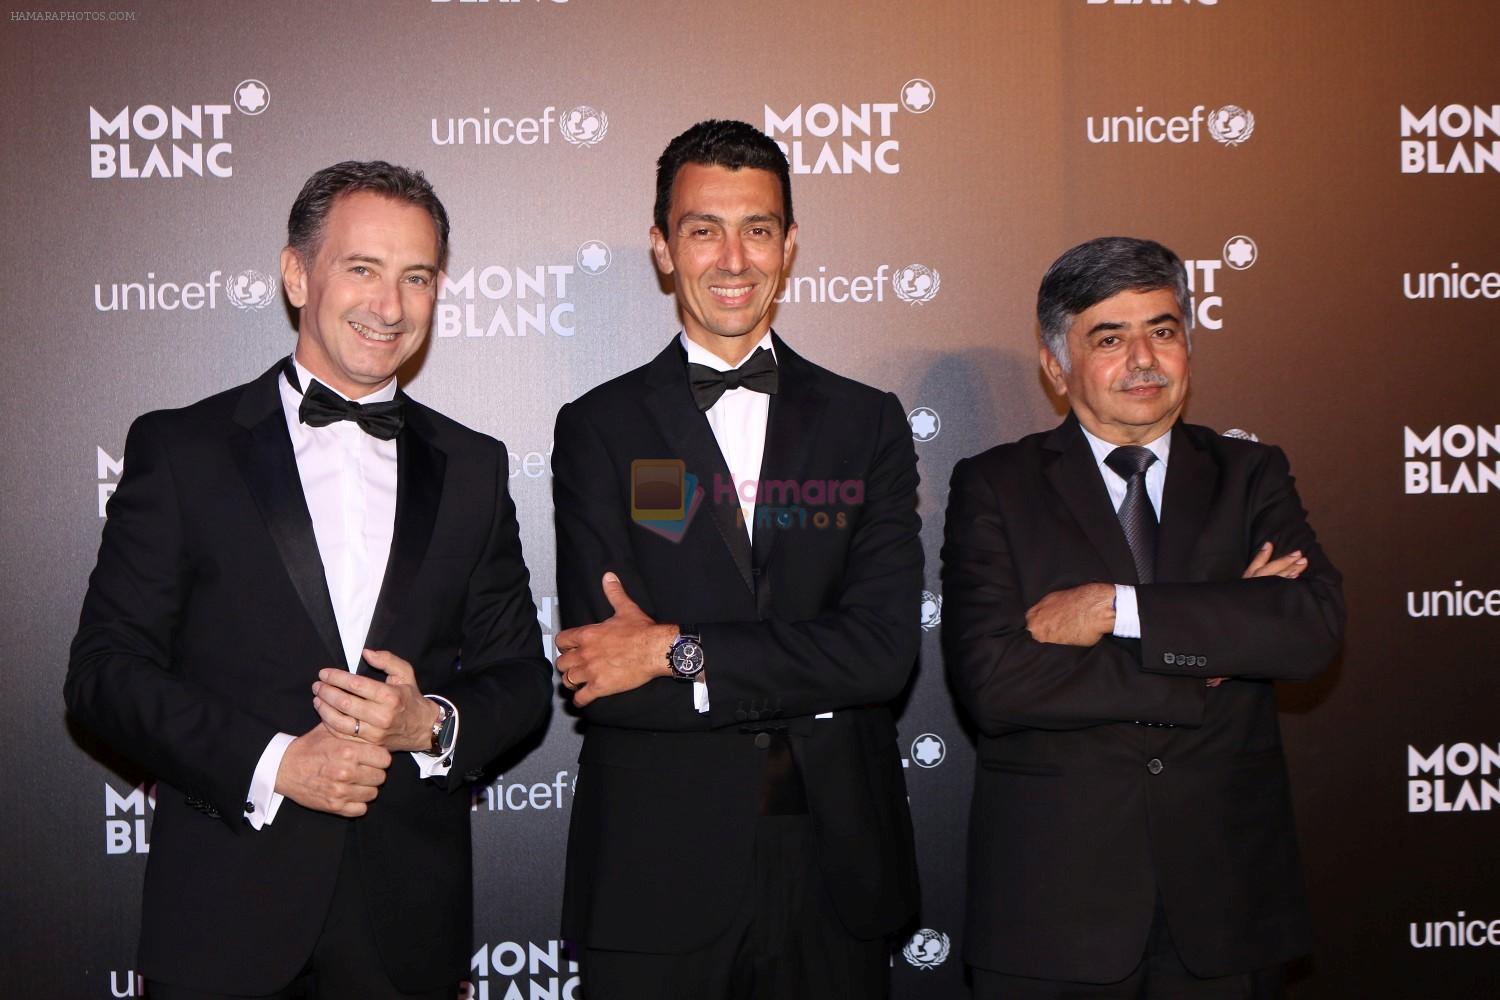 at the Red Carpet Of Montblanc Unicef on 2nd May 2017